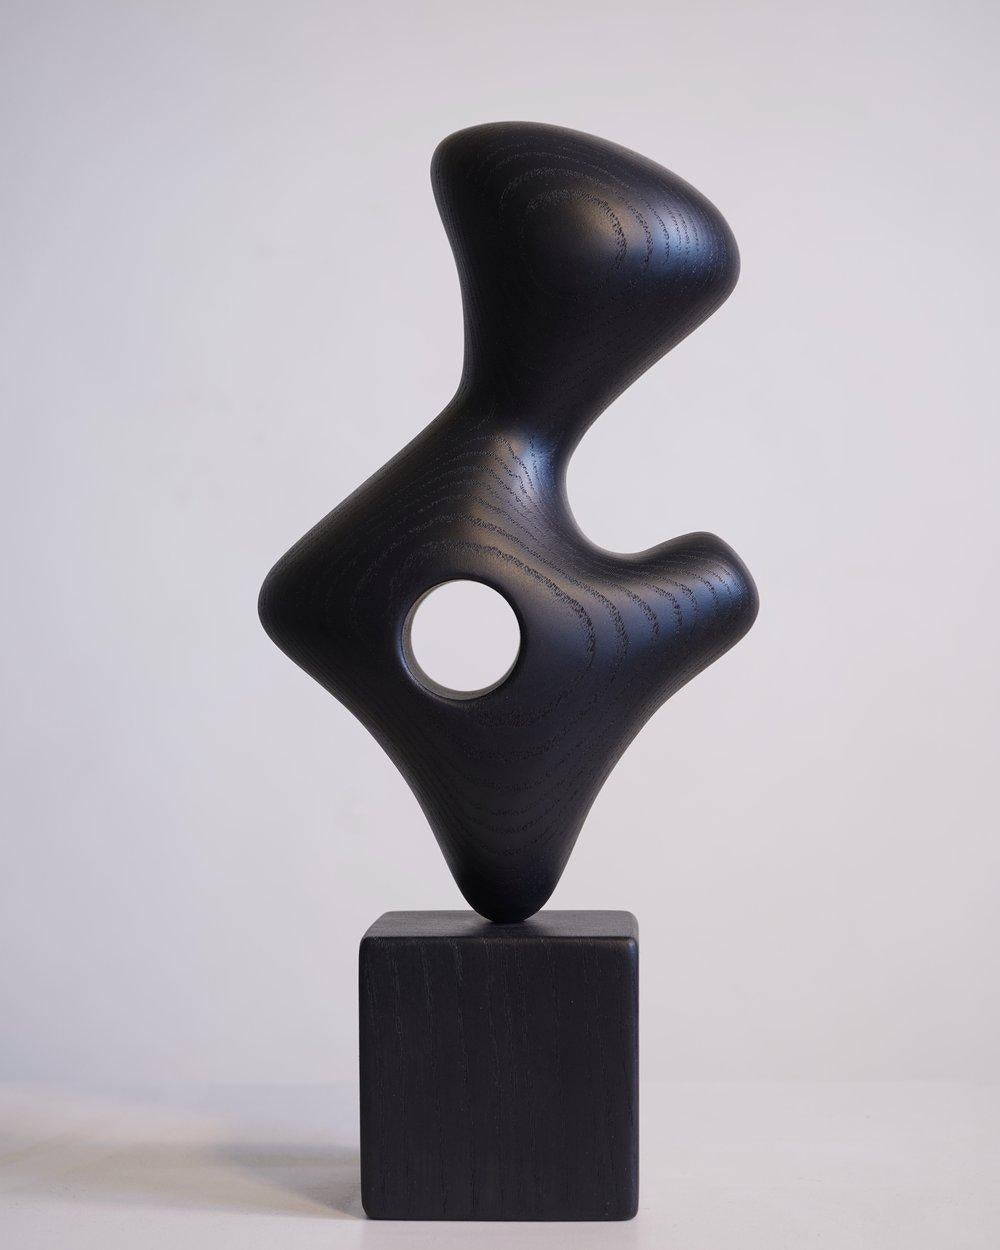 Petite Noire Scuplture by Chandler McLellan
Dimensions: D 7,6 x W 10,2 x H 30,5 cm. 
Materials: Ebonized ash.

Please expect minor differences in wood grain and other naturally occurring details. The sculpture will be signed and dated. Please